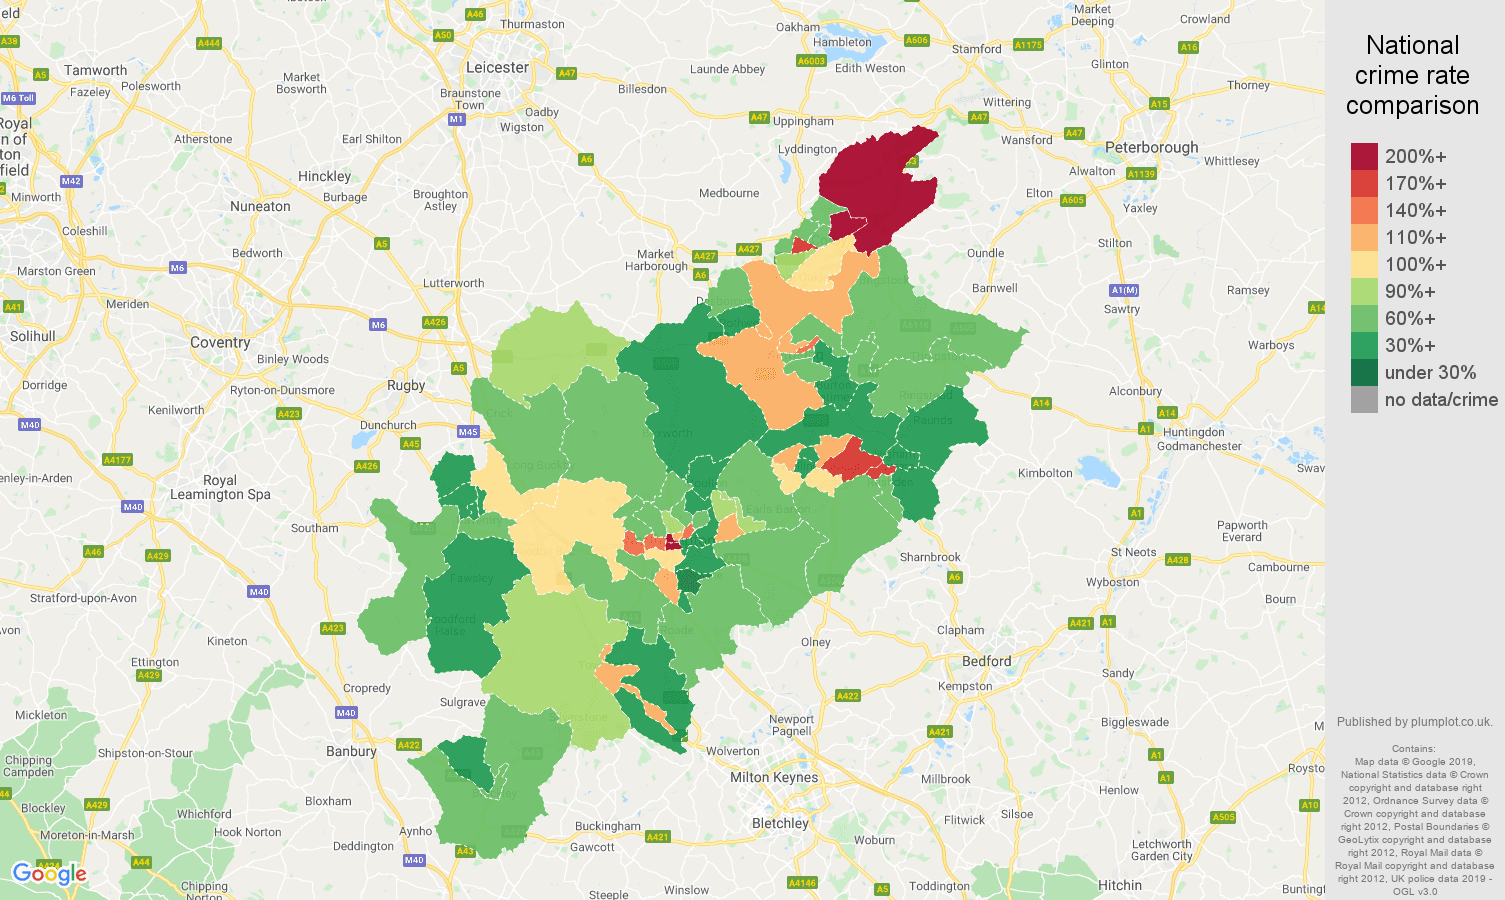 Northampton other theft crime rate comparison map